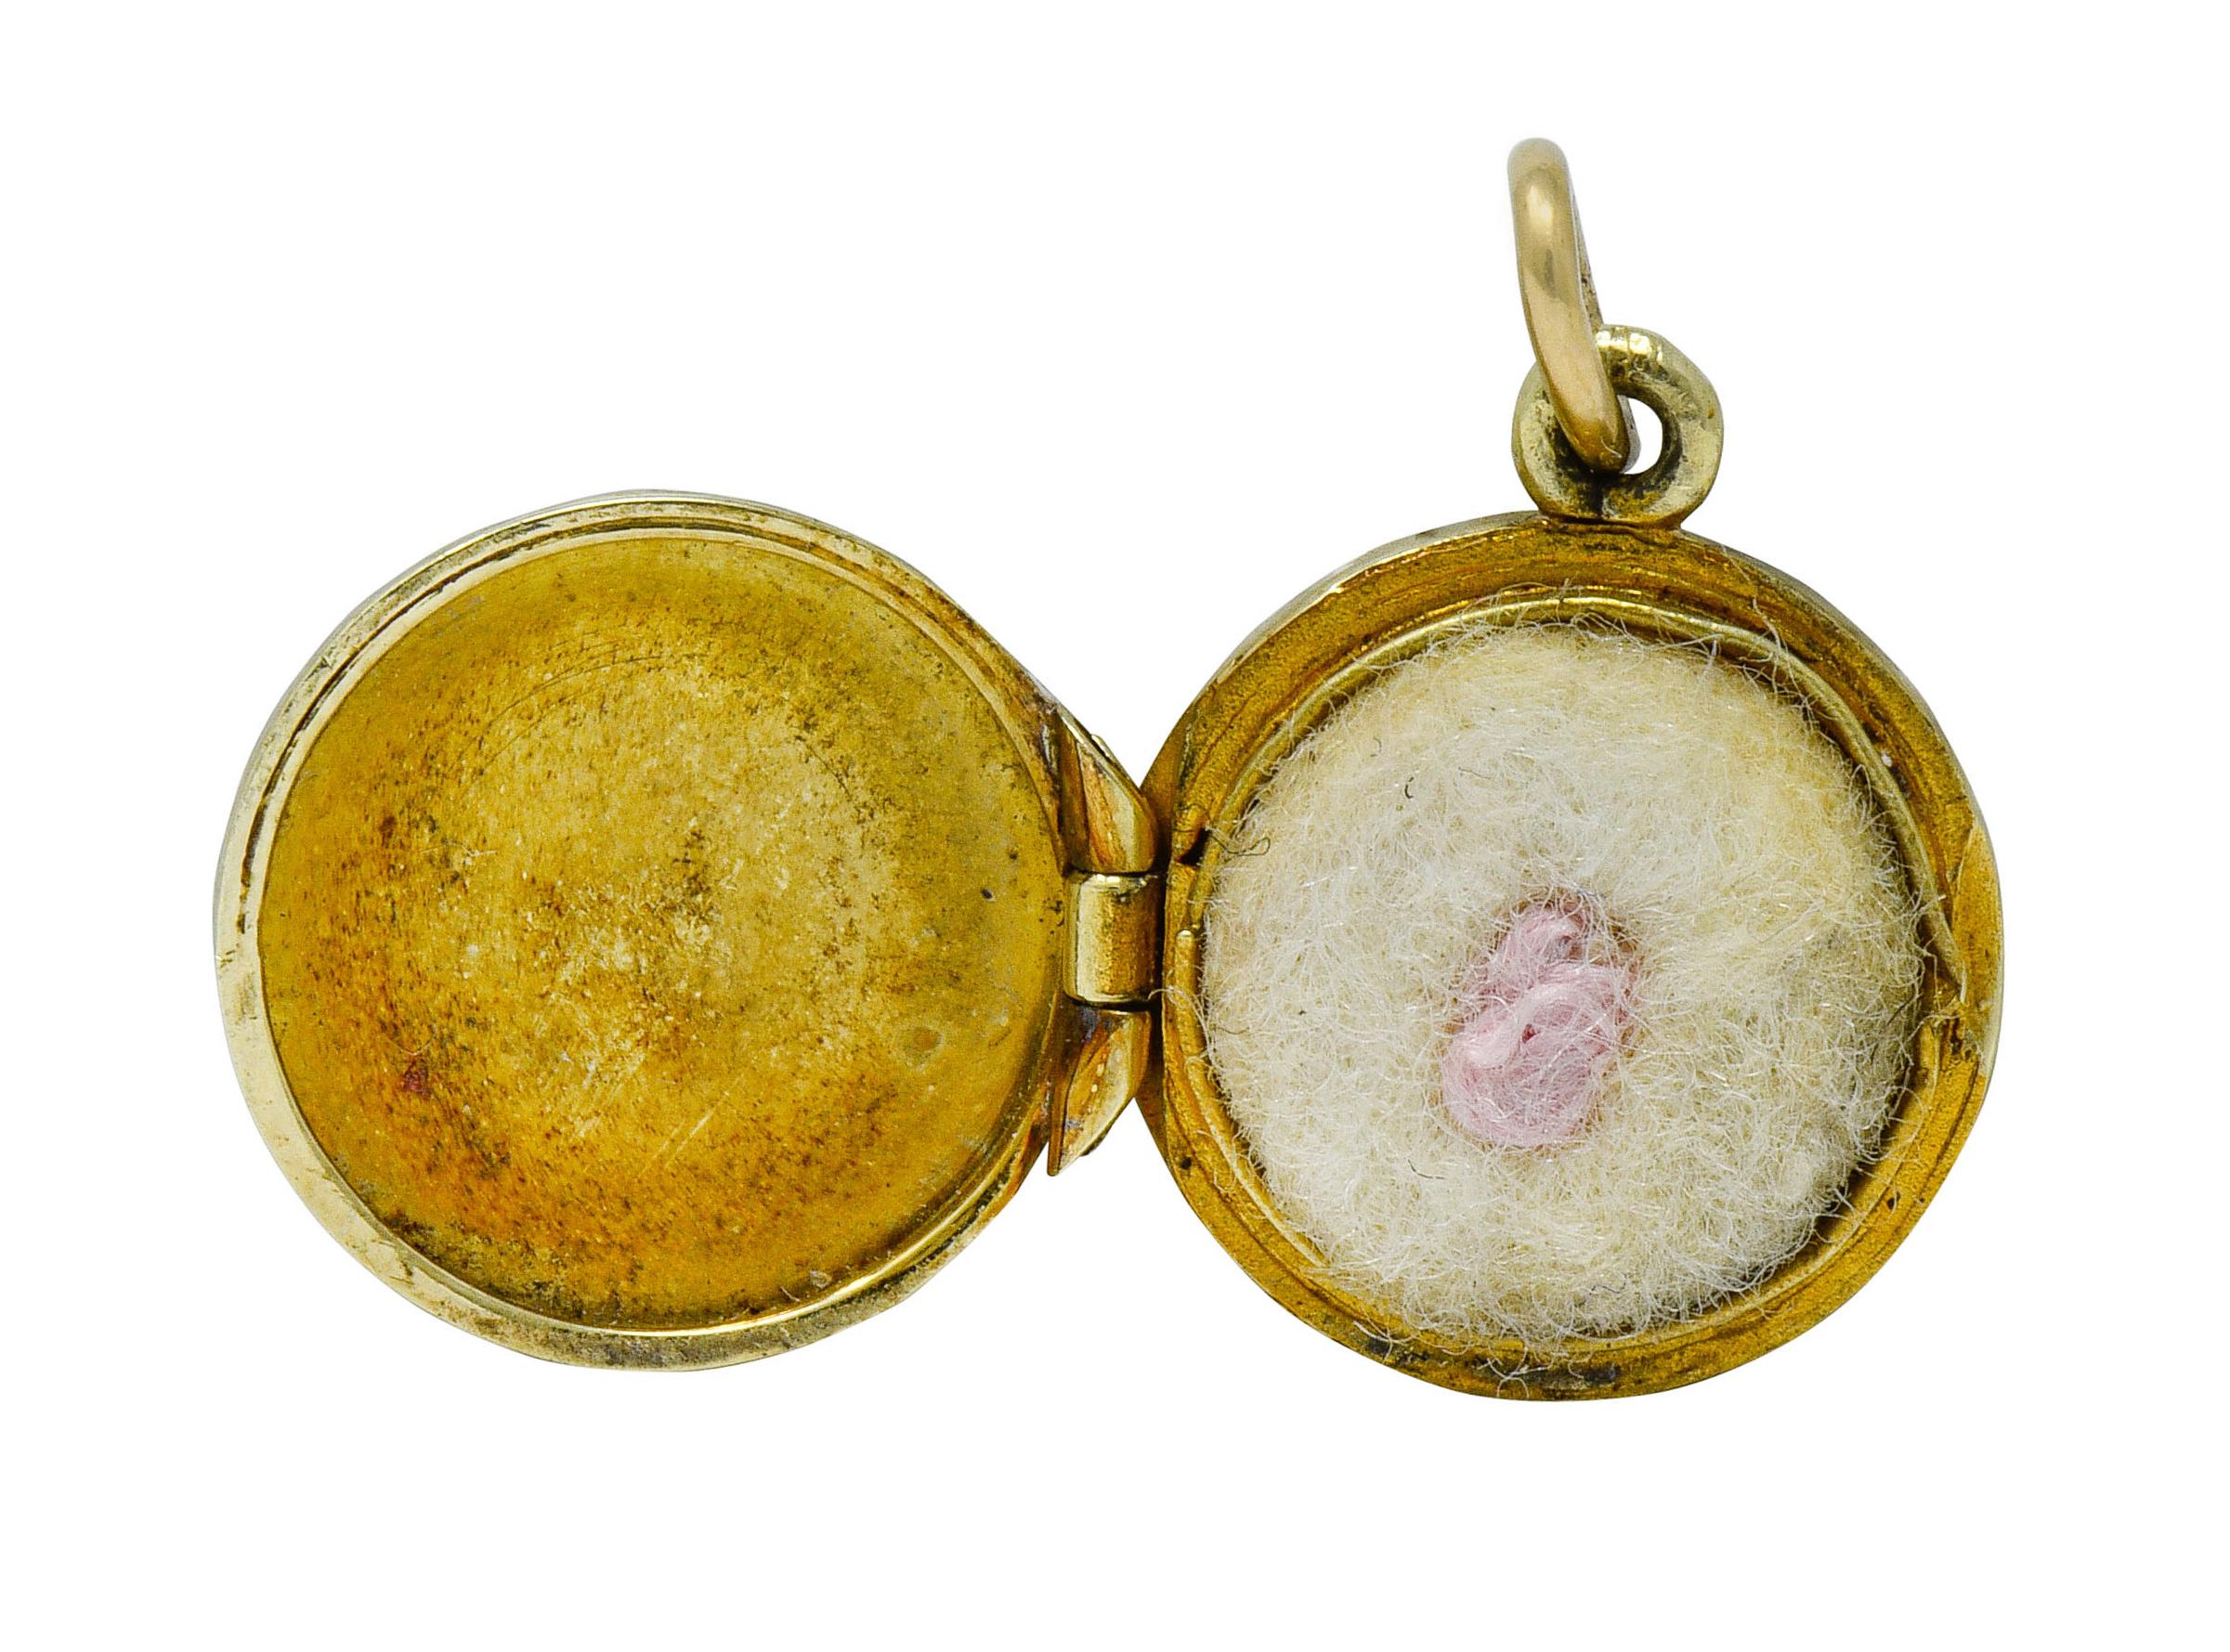 Circular charm featuring a deeply engraved radiating motif on both back and front

Opens on a hinge to reveal a removable powder puff with a cute pink pom pom

Completed by a jump ring bale

Maker's mark for Sloan & Co.

Stamped 14K for 14 karat